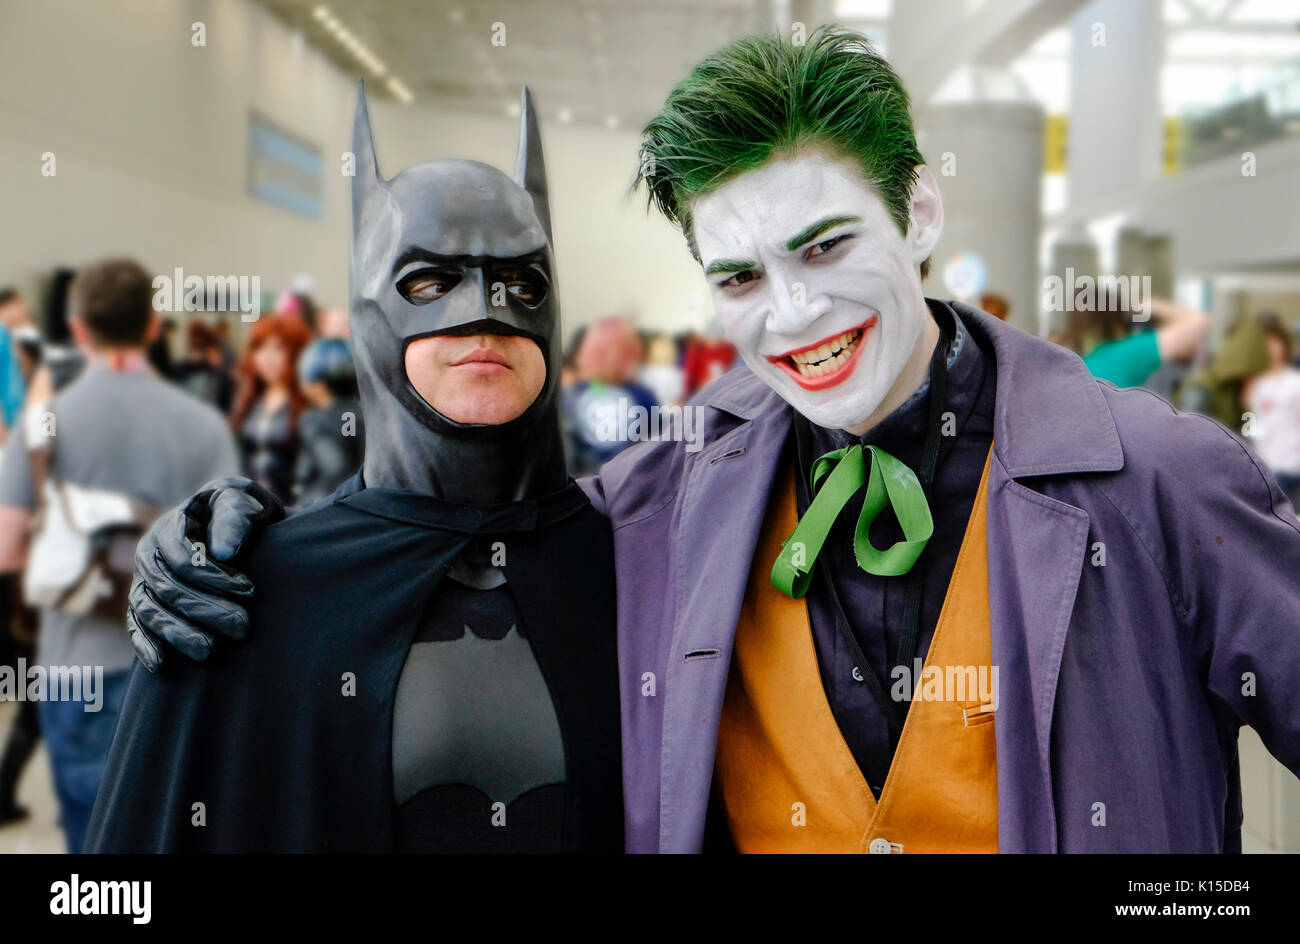 Los Angeles, California - November 1, 2014 - Cosplayers in Batman and Joker costumes at the Comikaze Expo 2014 at the Los Angeles Convention Center. Stock Photo